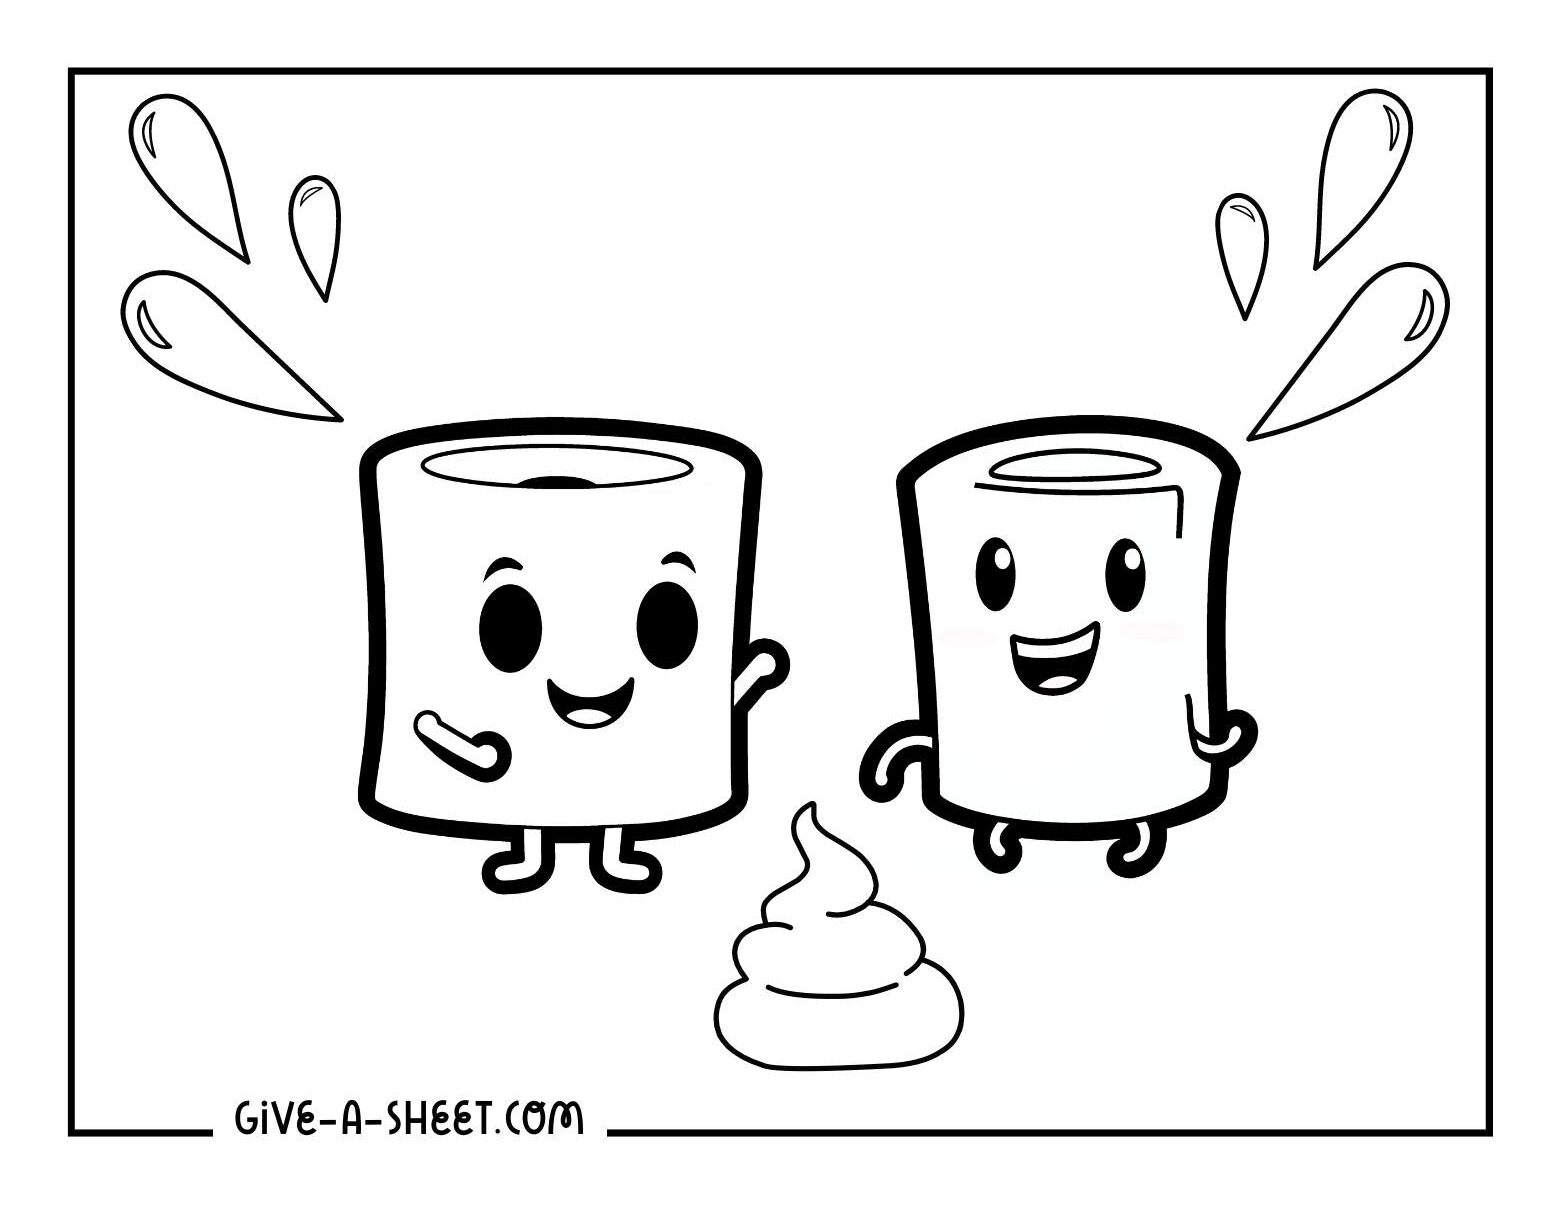 Toilet paper rainbow friends printable coloring pages for kids.